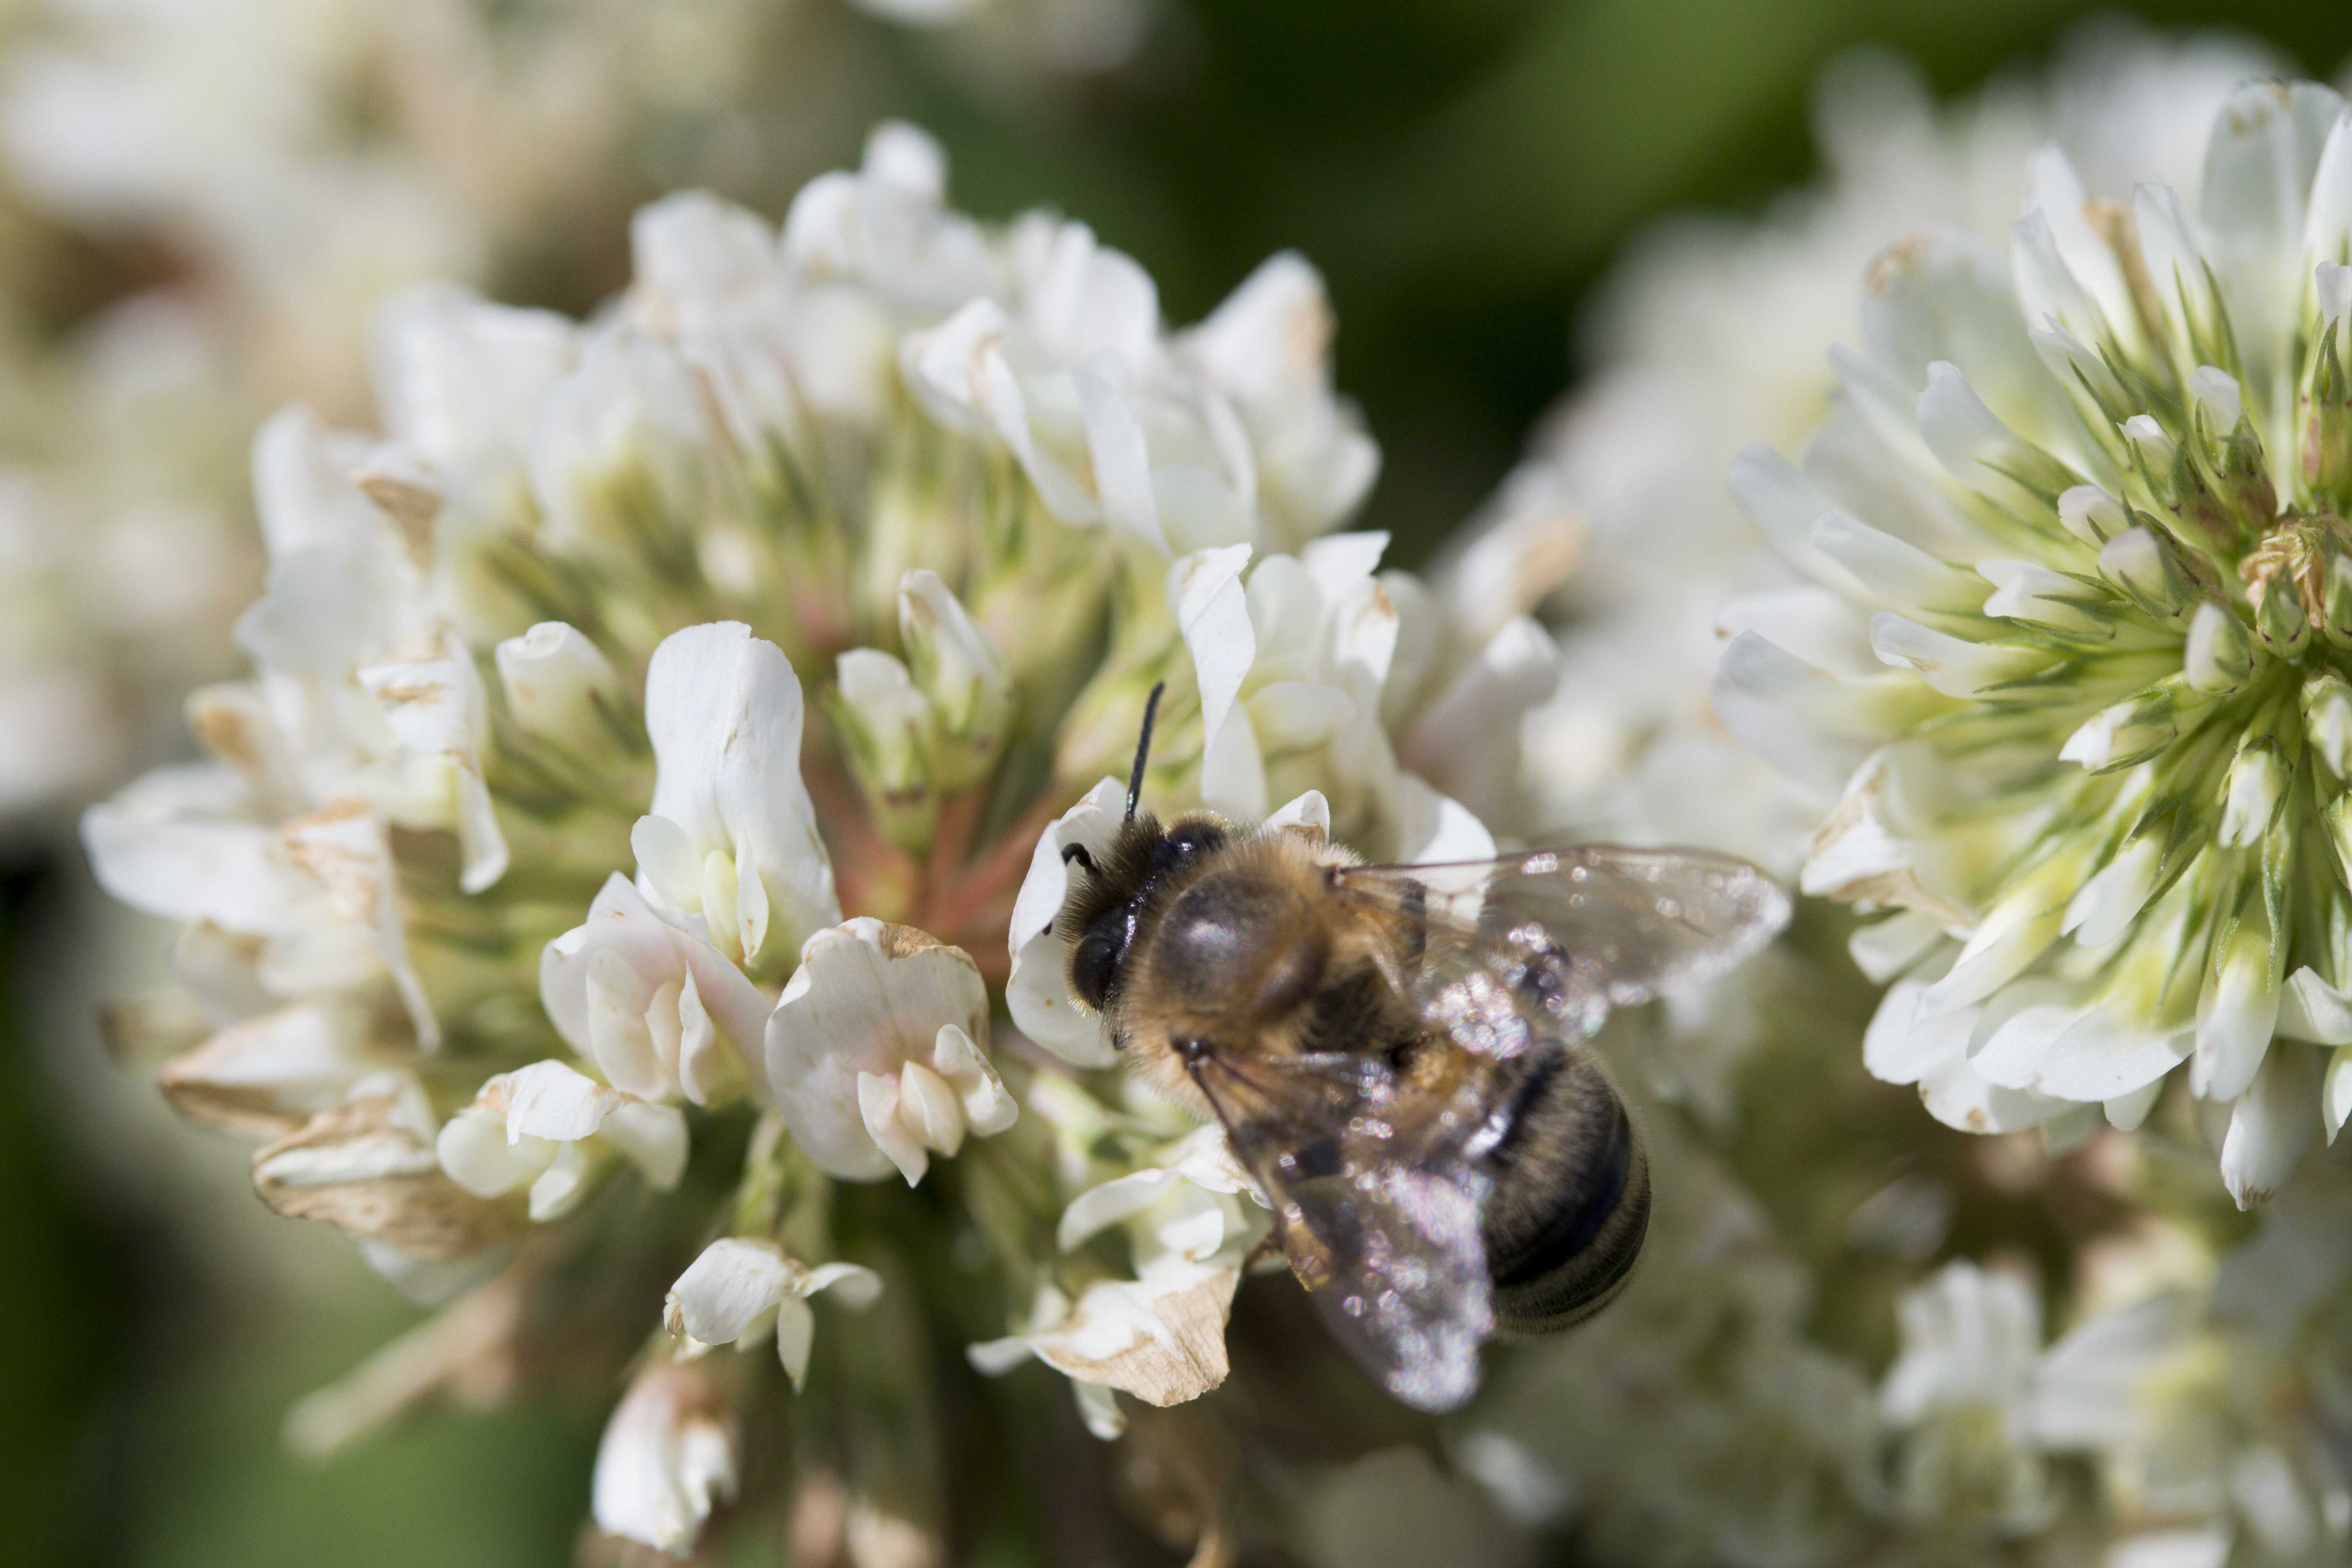 A honey bee on white clover. UF/IFAS photo taken 04-18-18